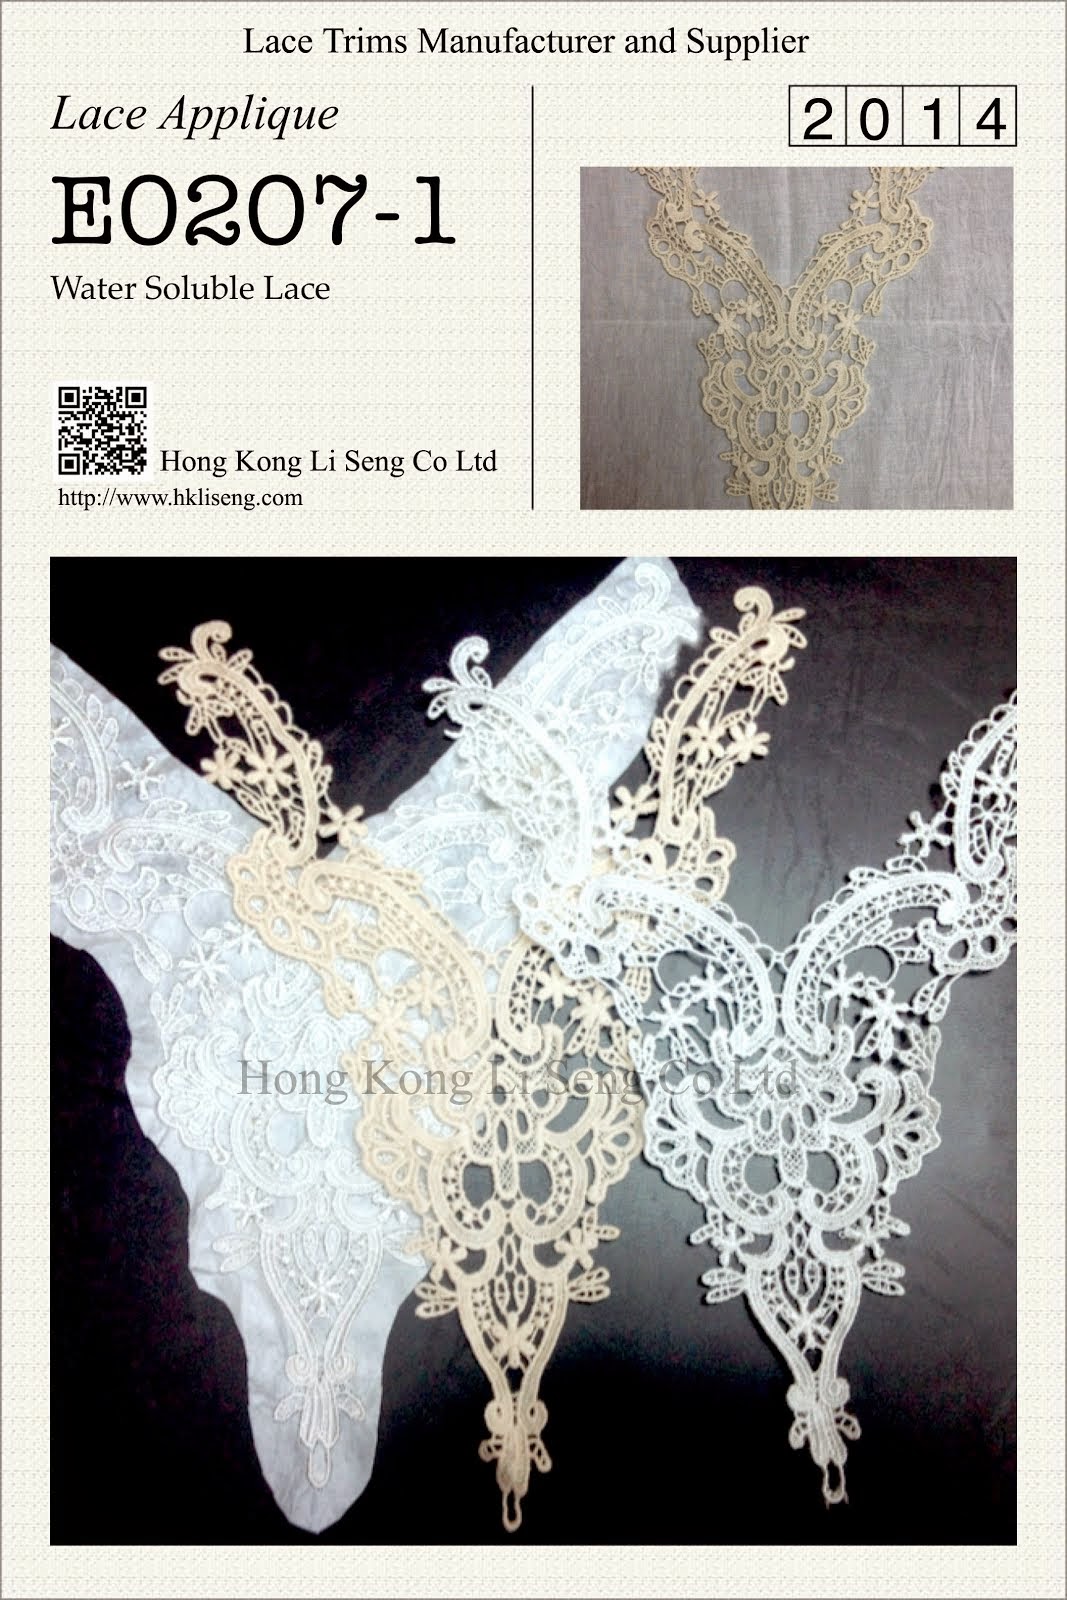 Are you looking for Lace Trims Manufacturer for your New Style Fashion Apparel - Coming Season